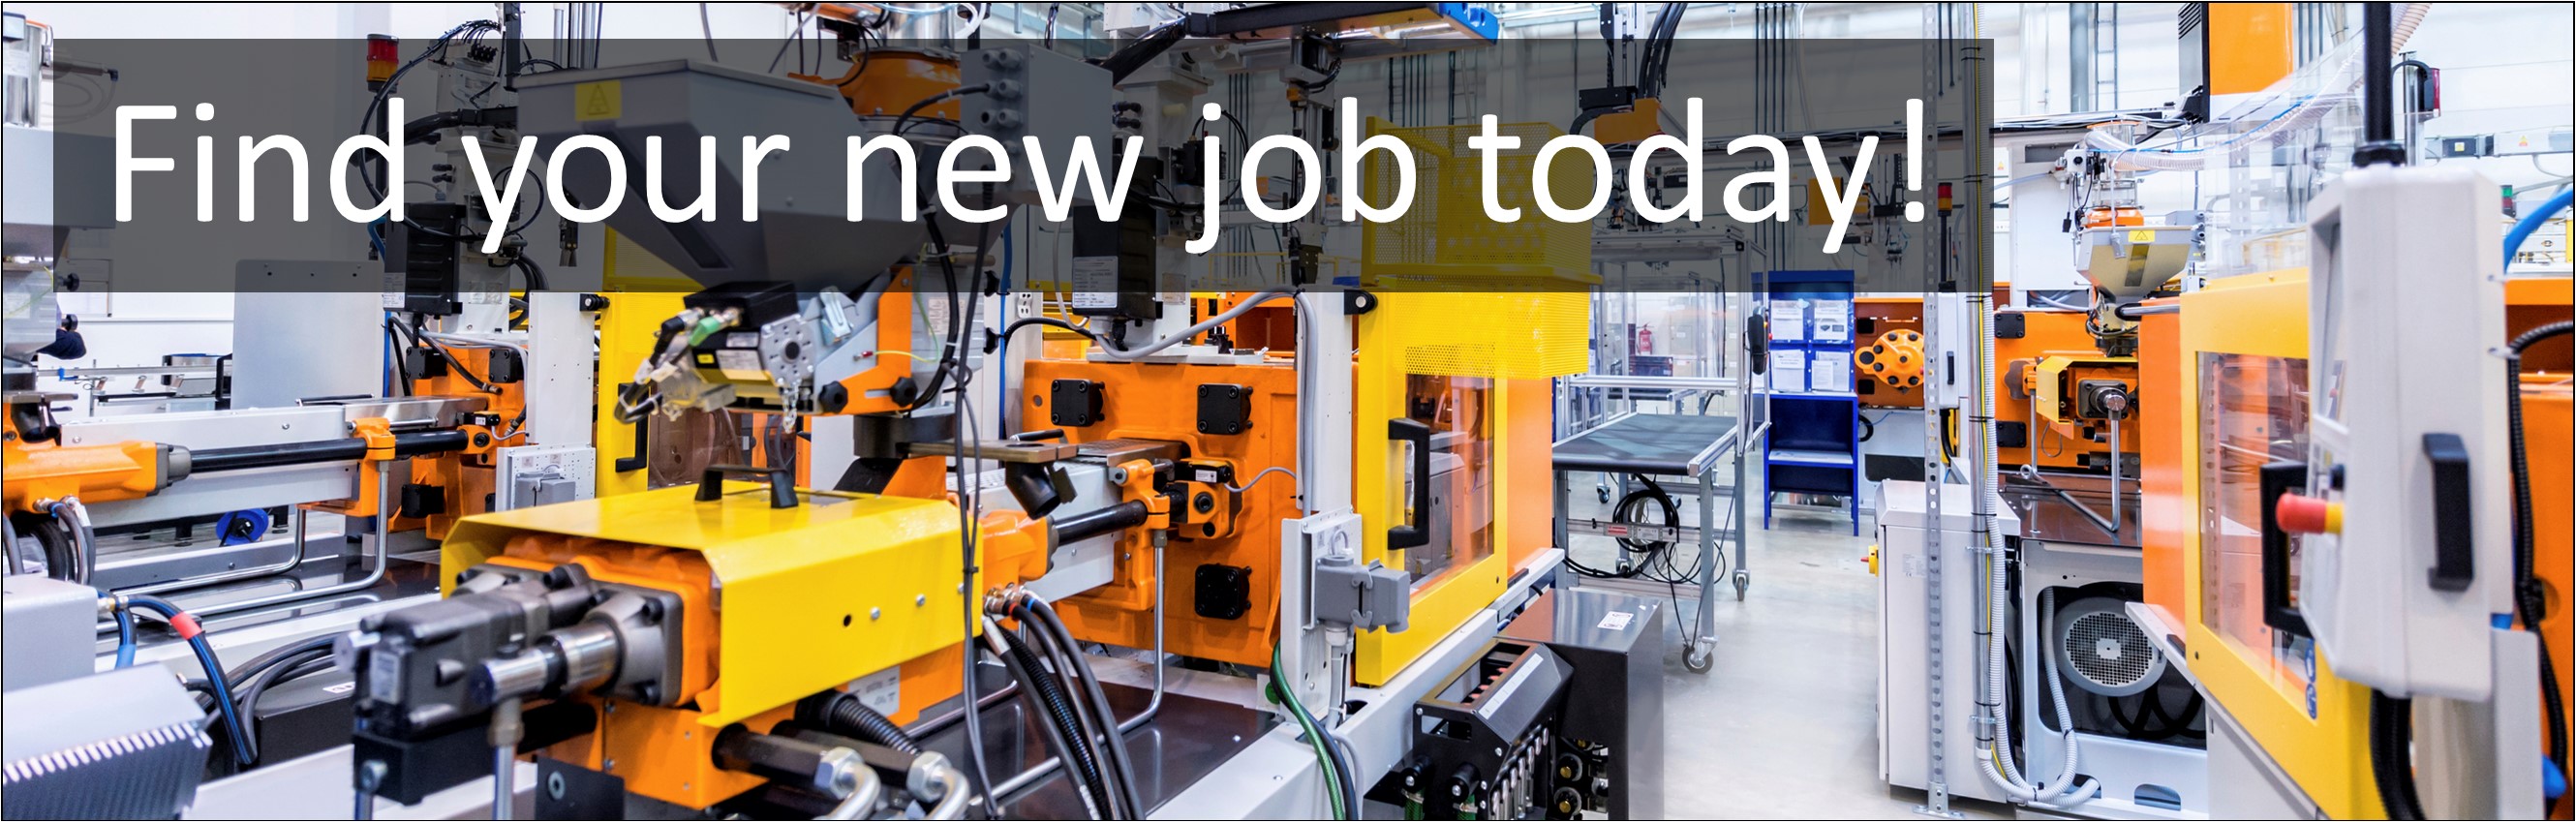 Manufacturing Jobs. Mechanical Maintenance Engineer Jobs, Careers & Vacancies in Hyde, Cheshire, North West England Advertised by AWD online – Multi-Job Board Advertising and CV Sourcing Recruitment Services